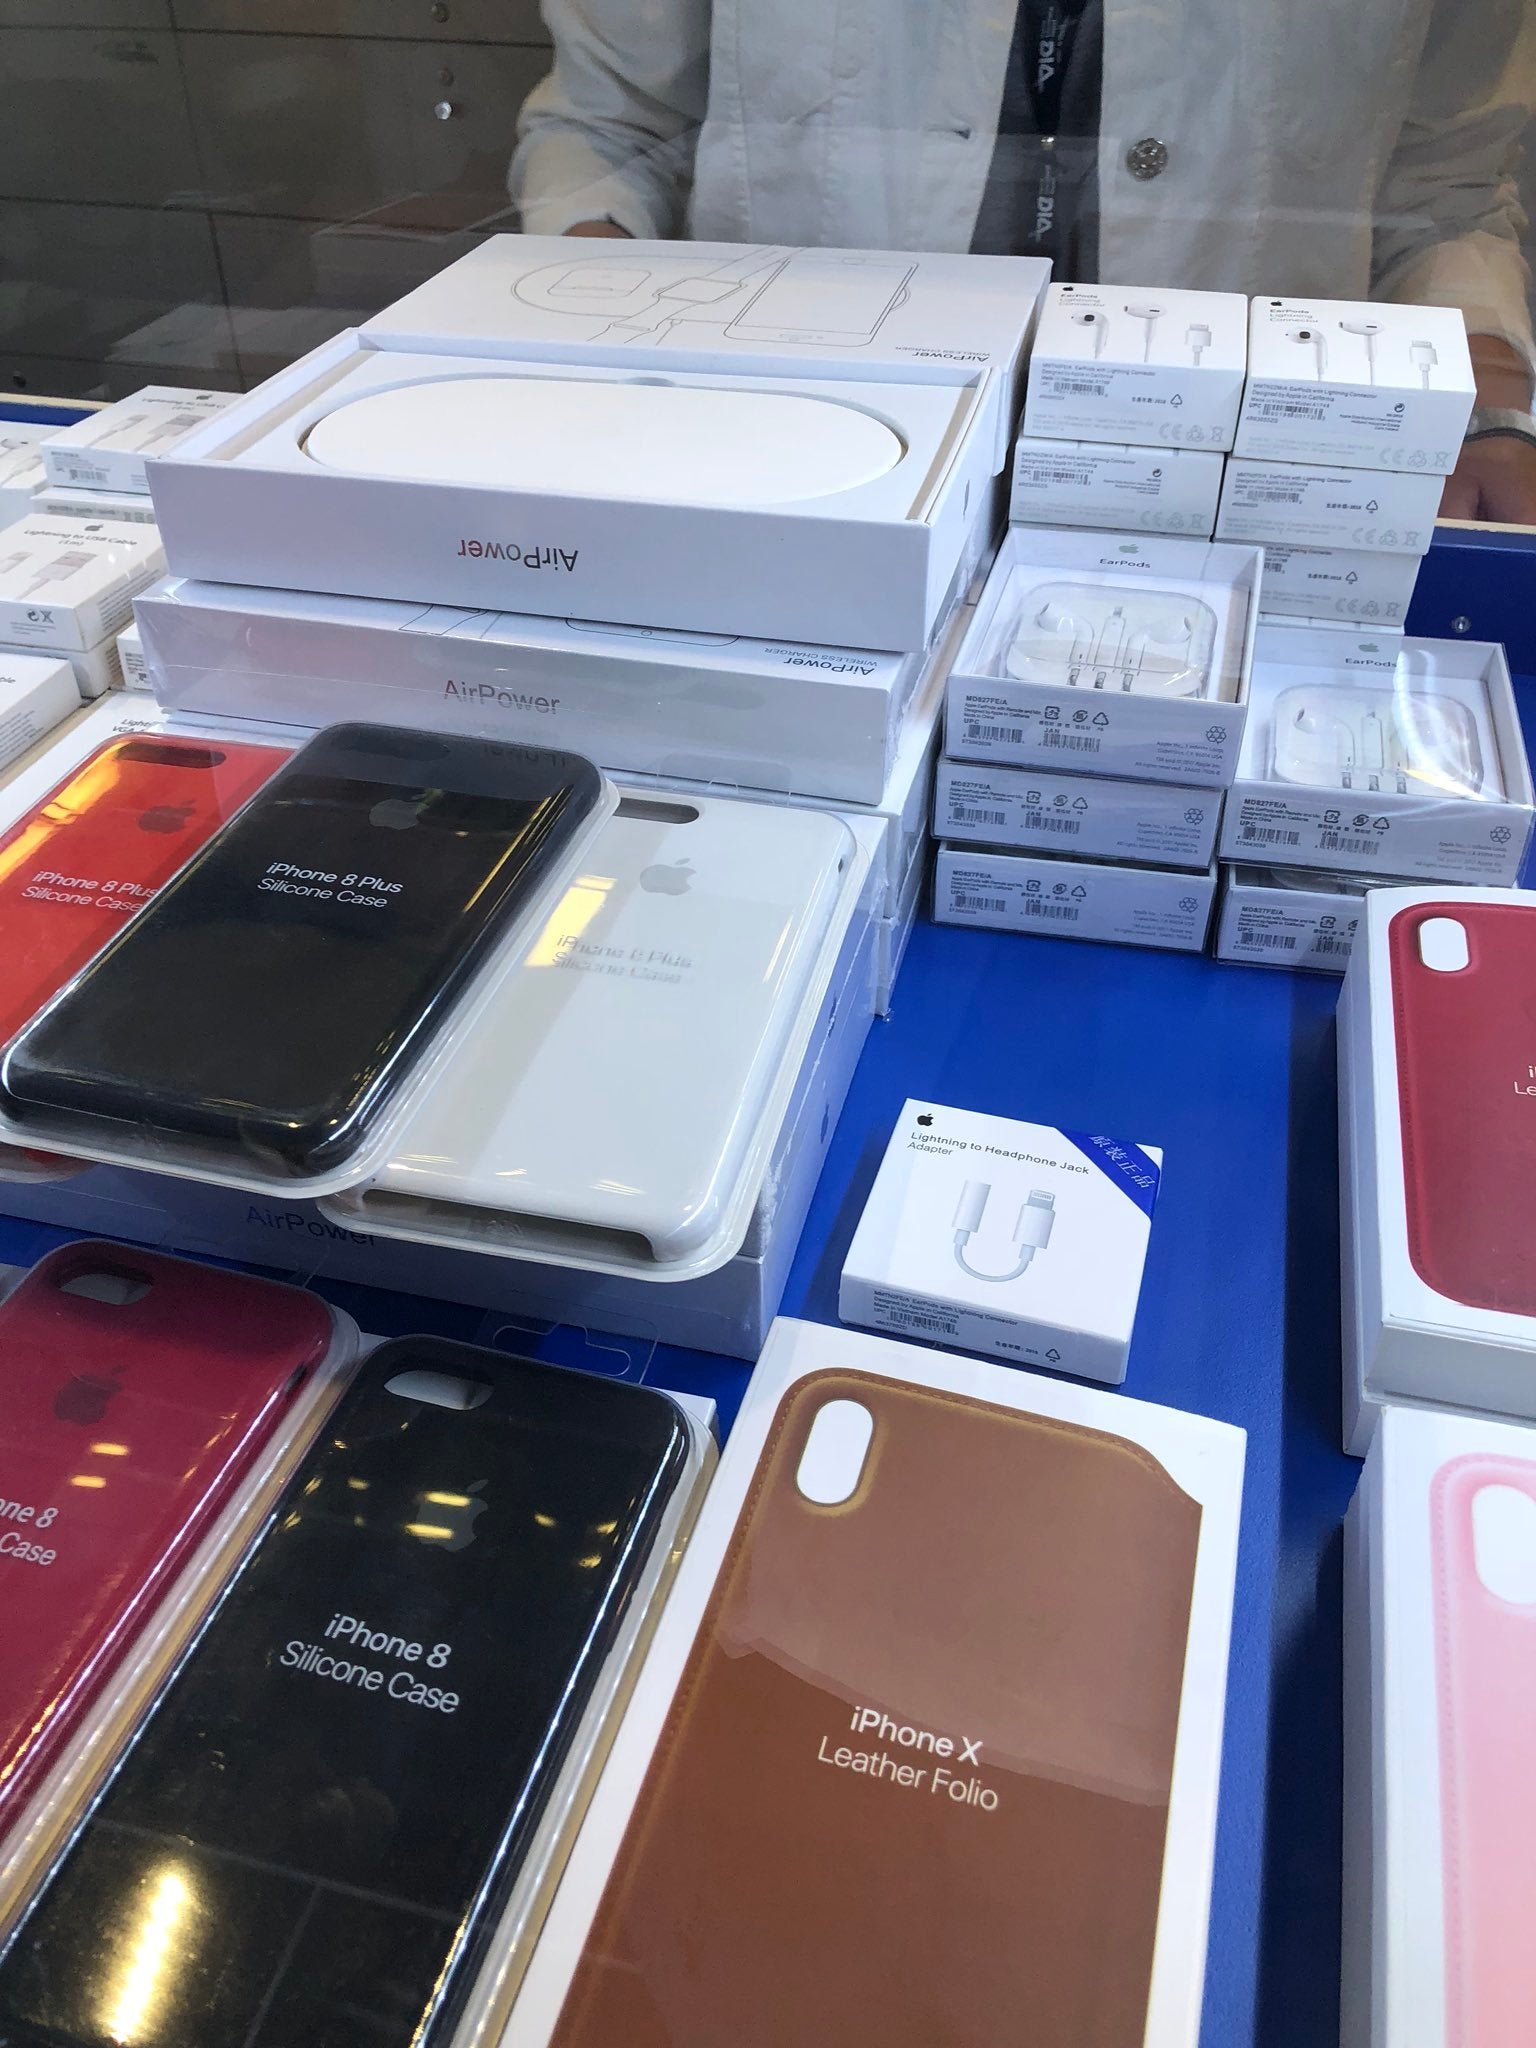 The AirPower Qi charging pad, like probably all of the Apple products seen here, is fake - Apple AirPower Qi pad seen in Vienna airport turns out to be a fake